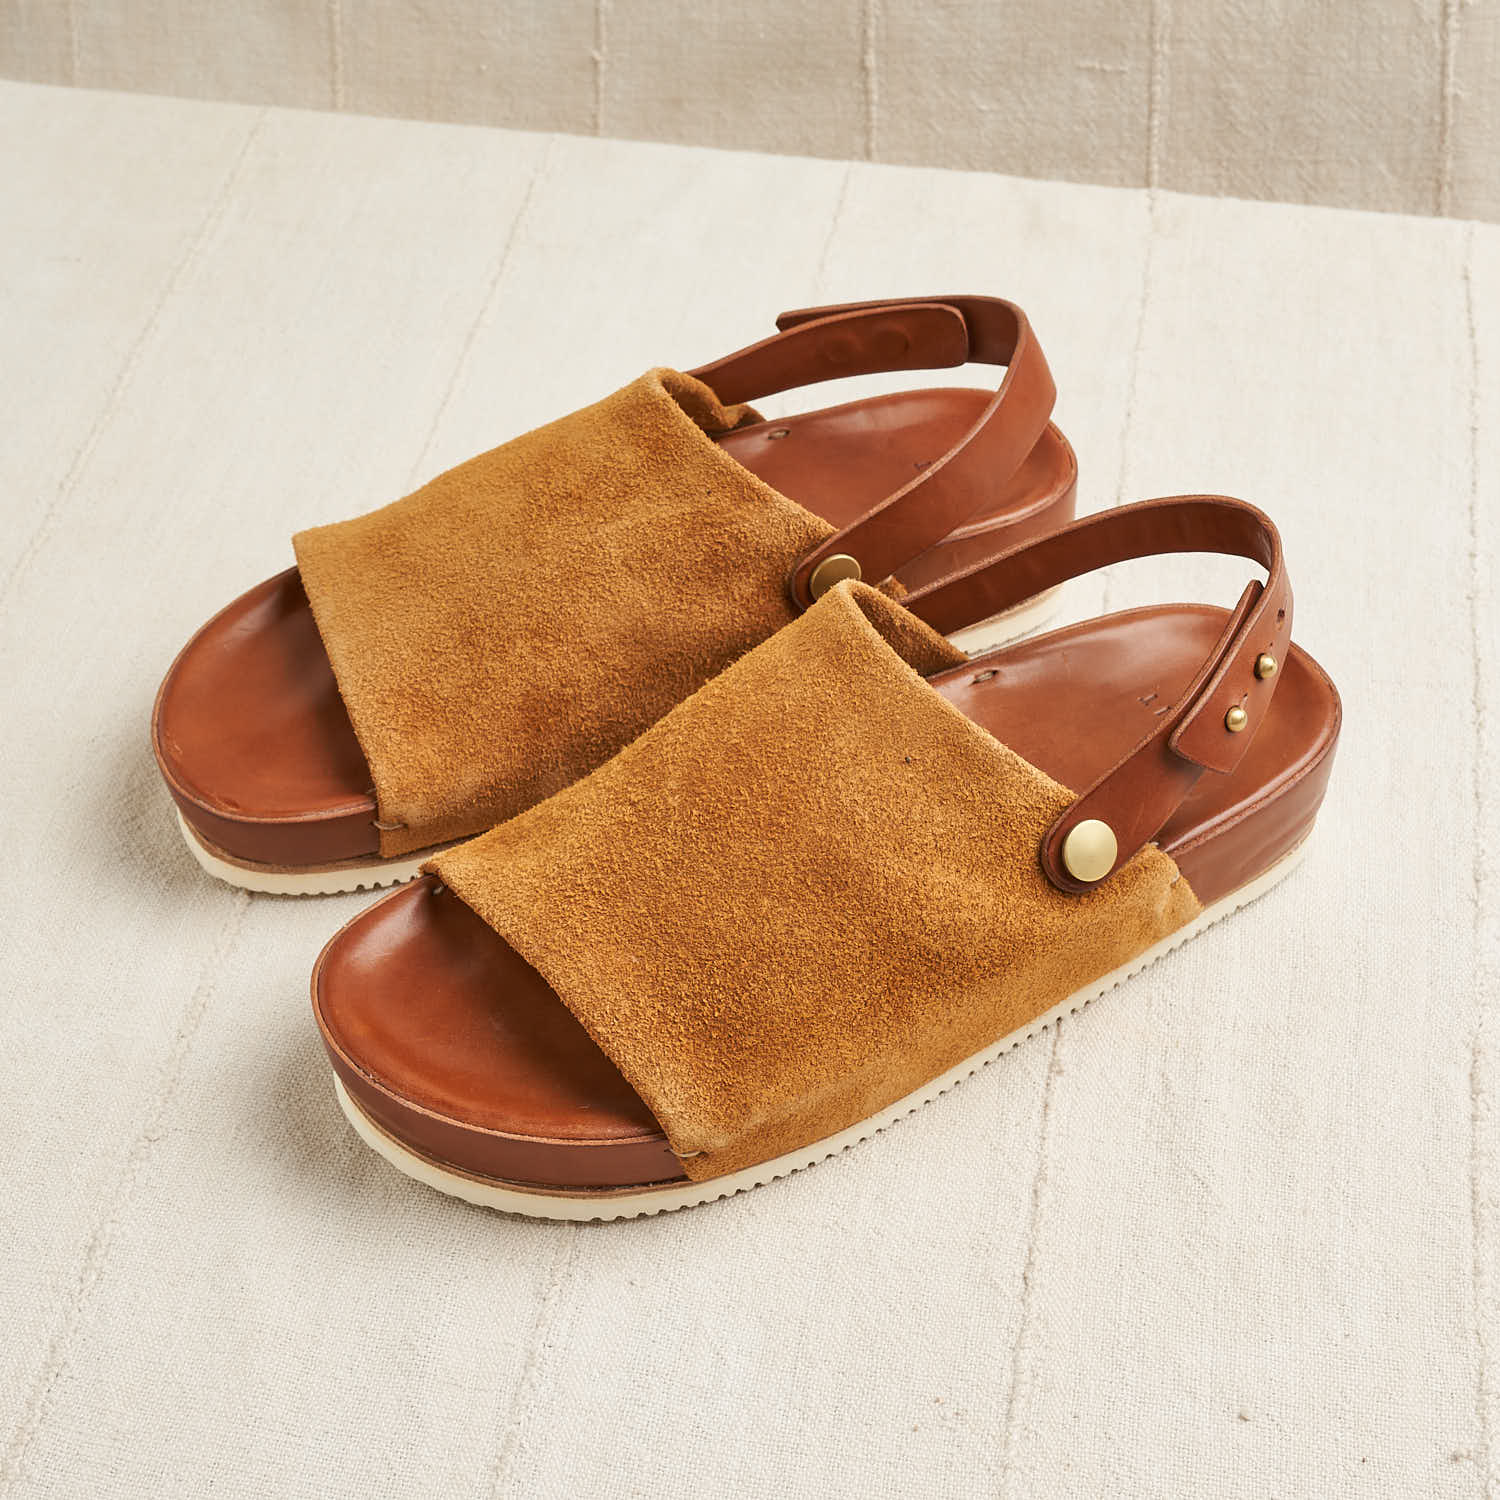 One Strap Sandal, Vegetable Tanned Suede